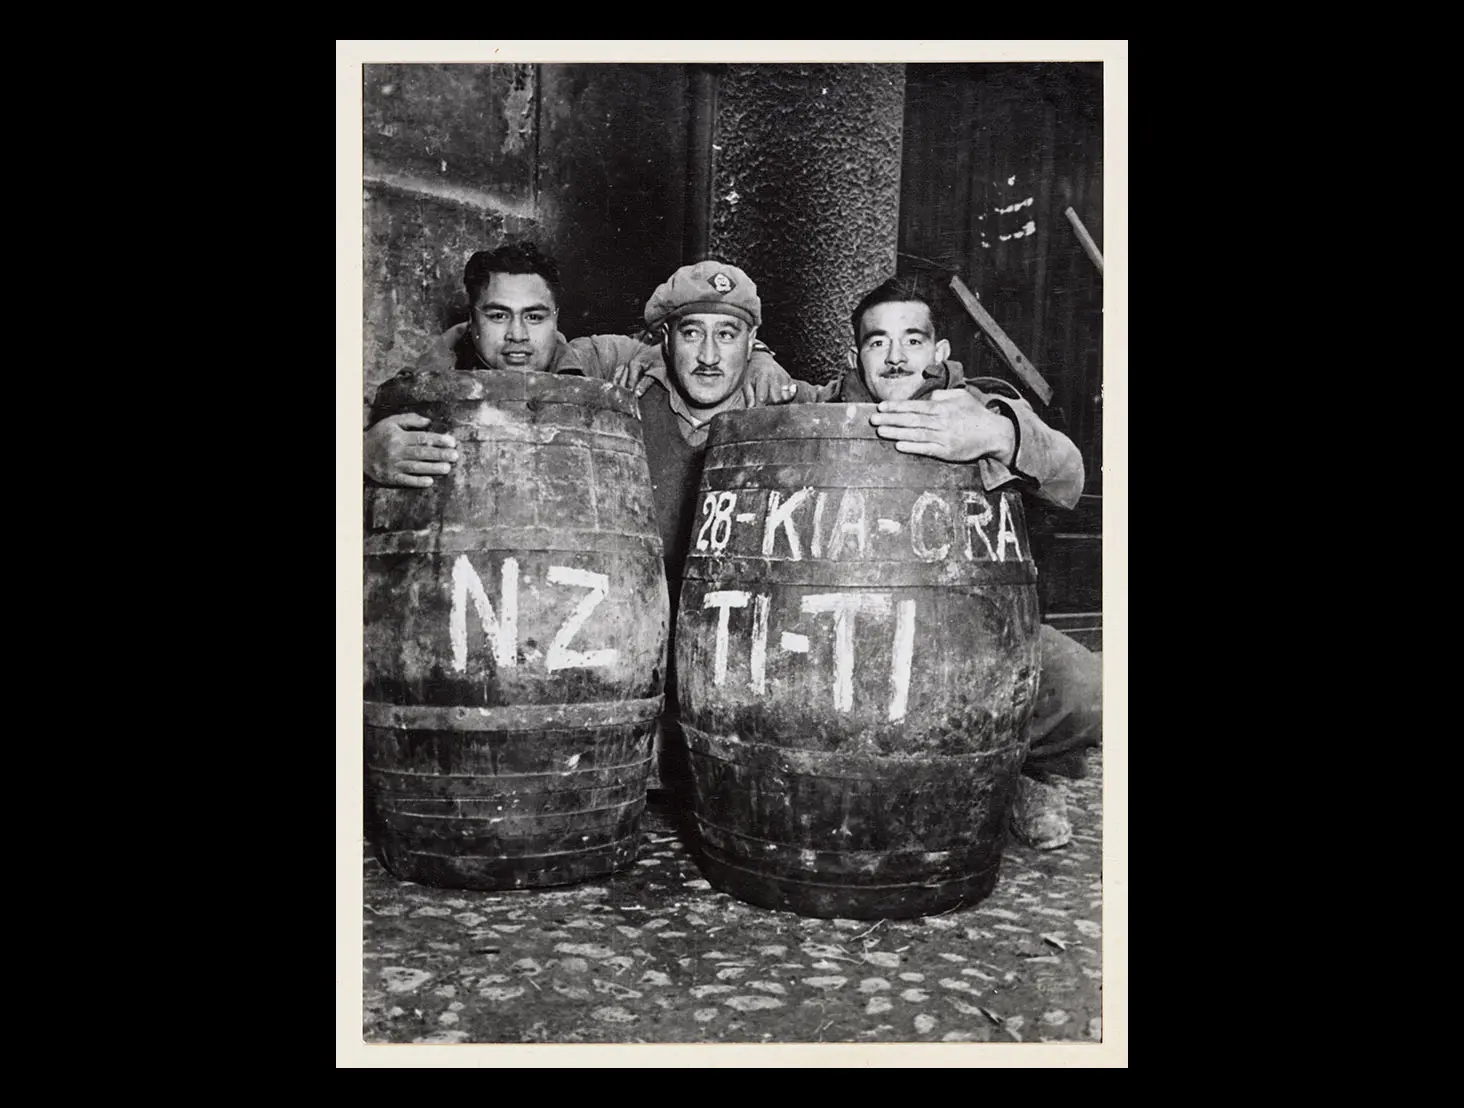 3 soldiers from the 28th (Māori) Battalion peering out from behind 2 barrels of tītī (muttonbirds) sent from Aotearoa NZ.